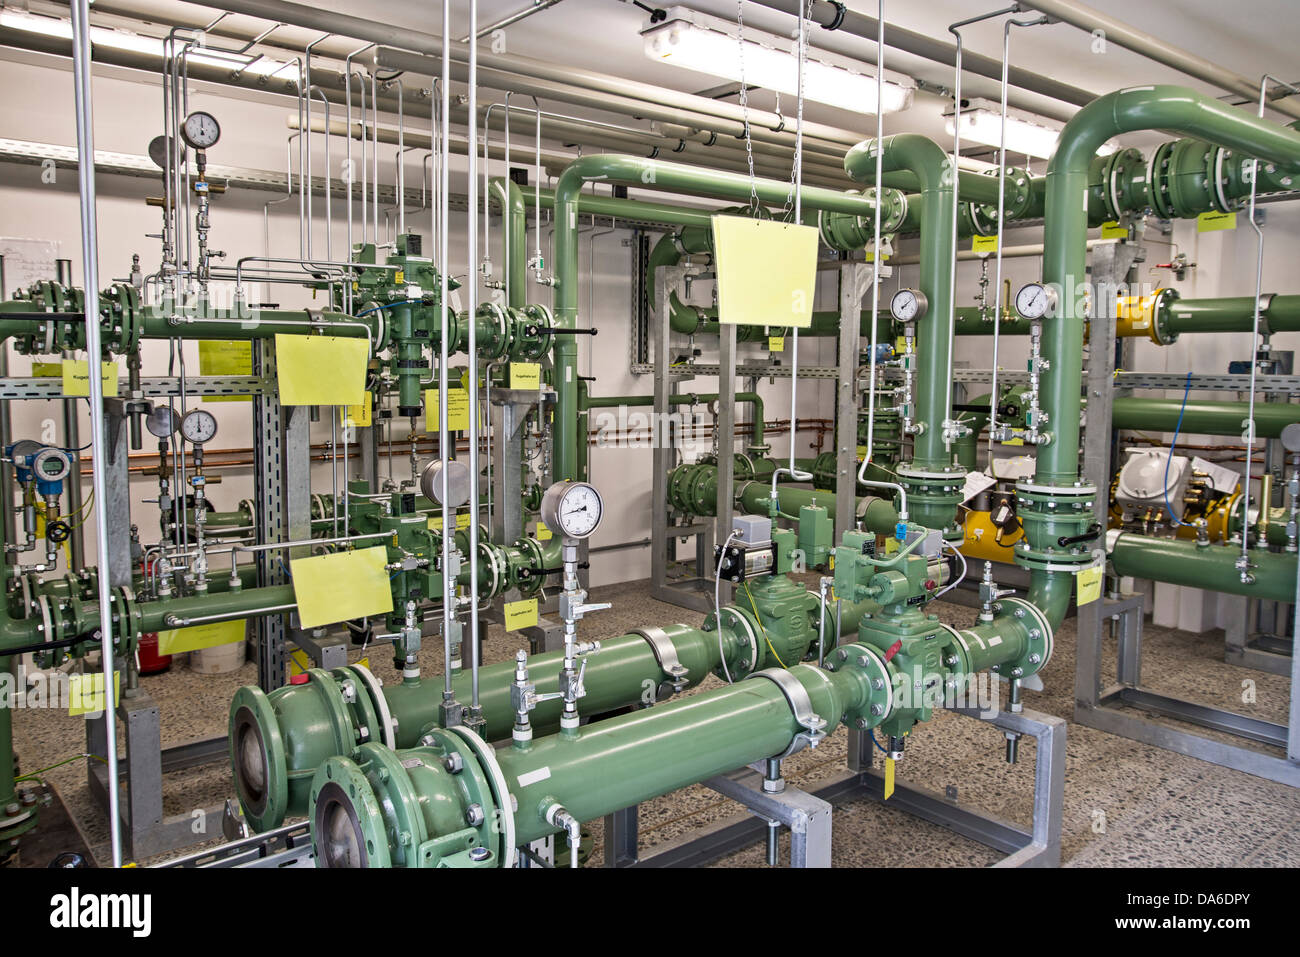 View in a gas pressure control system. Stock Photo